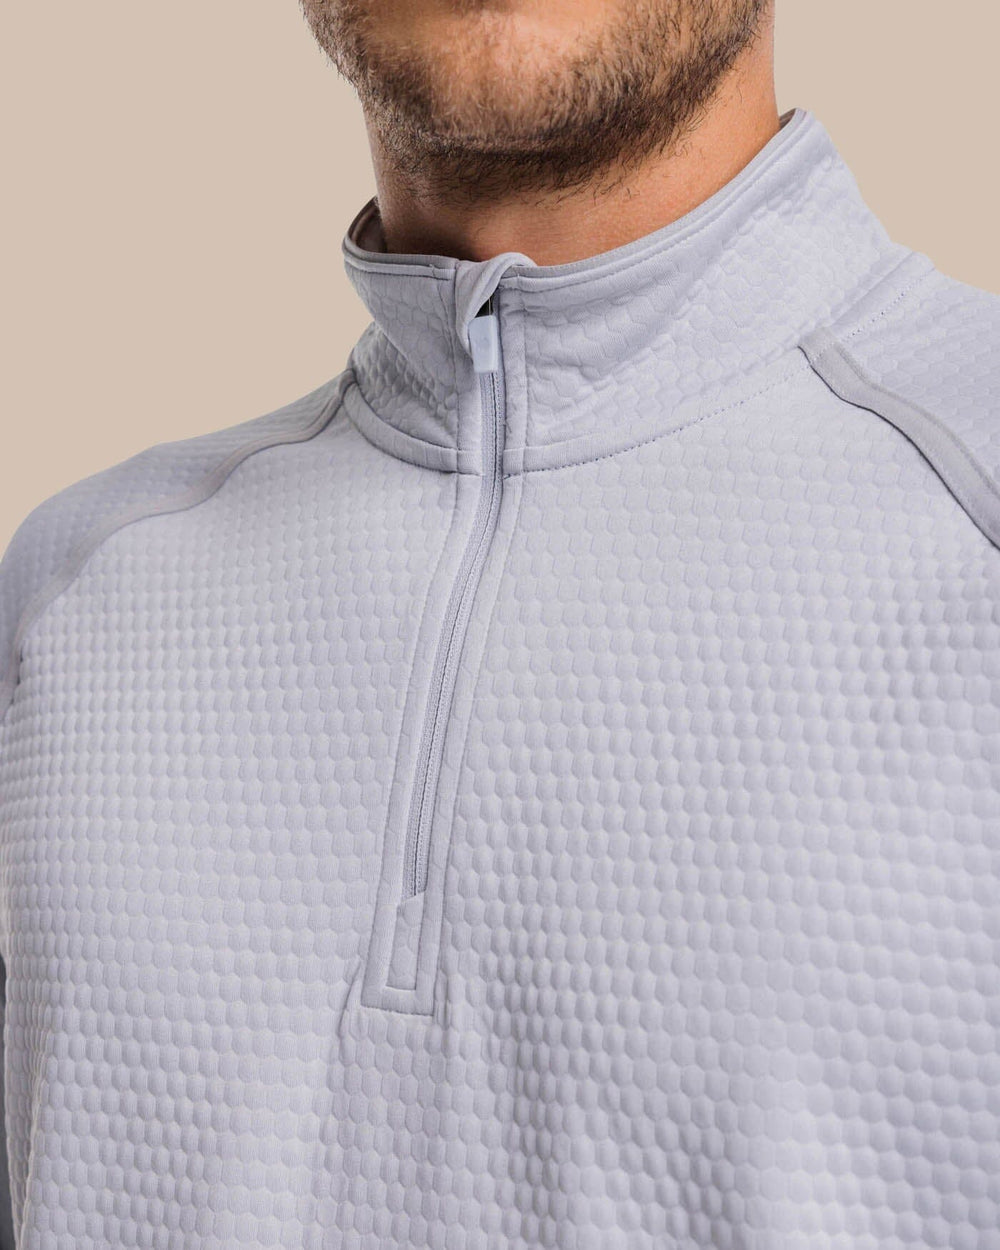 The detail view of the Southern Tide Scuttle Heather Quarter Zip Pullover by Southern Tide - Heather Slate Grey